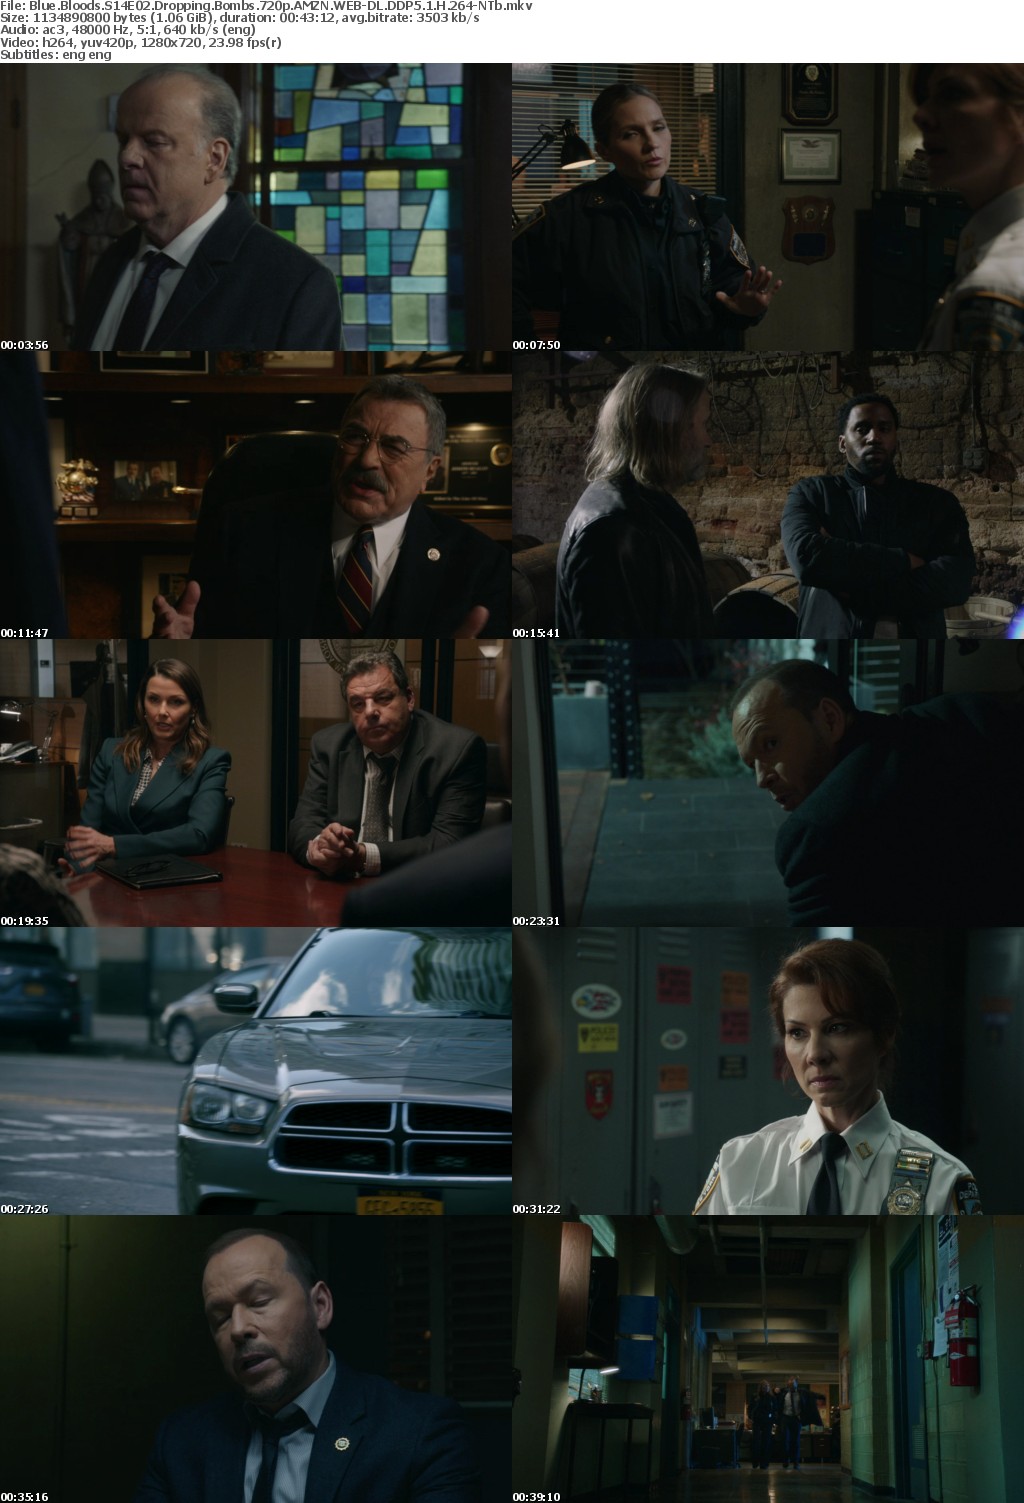 Blue Bloods S14E02 Dropping Bombs 720p AMZN WEB-DL DDP5 1 H 264-NTb